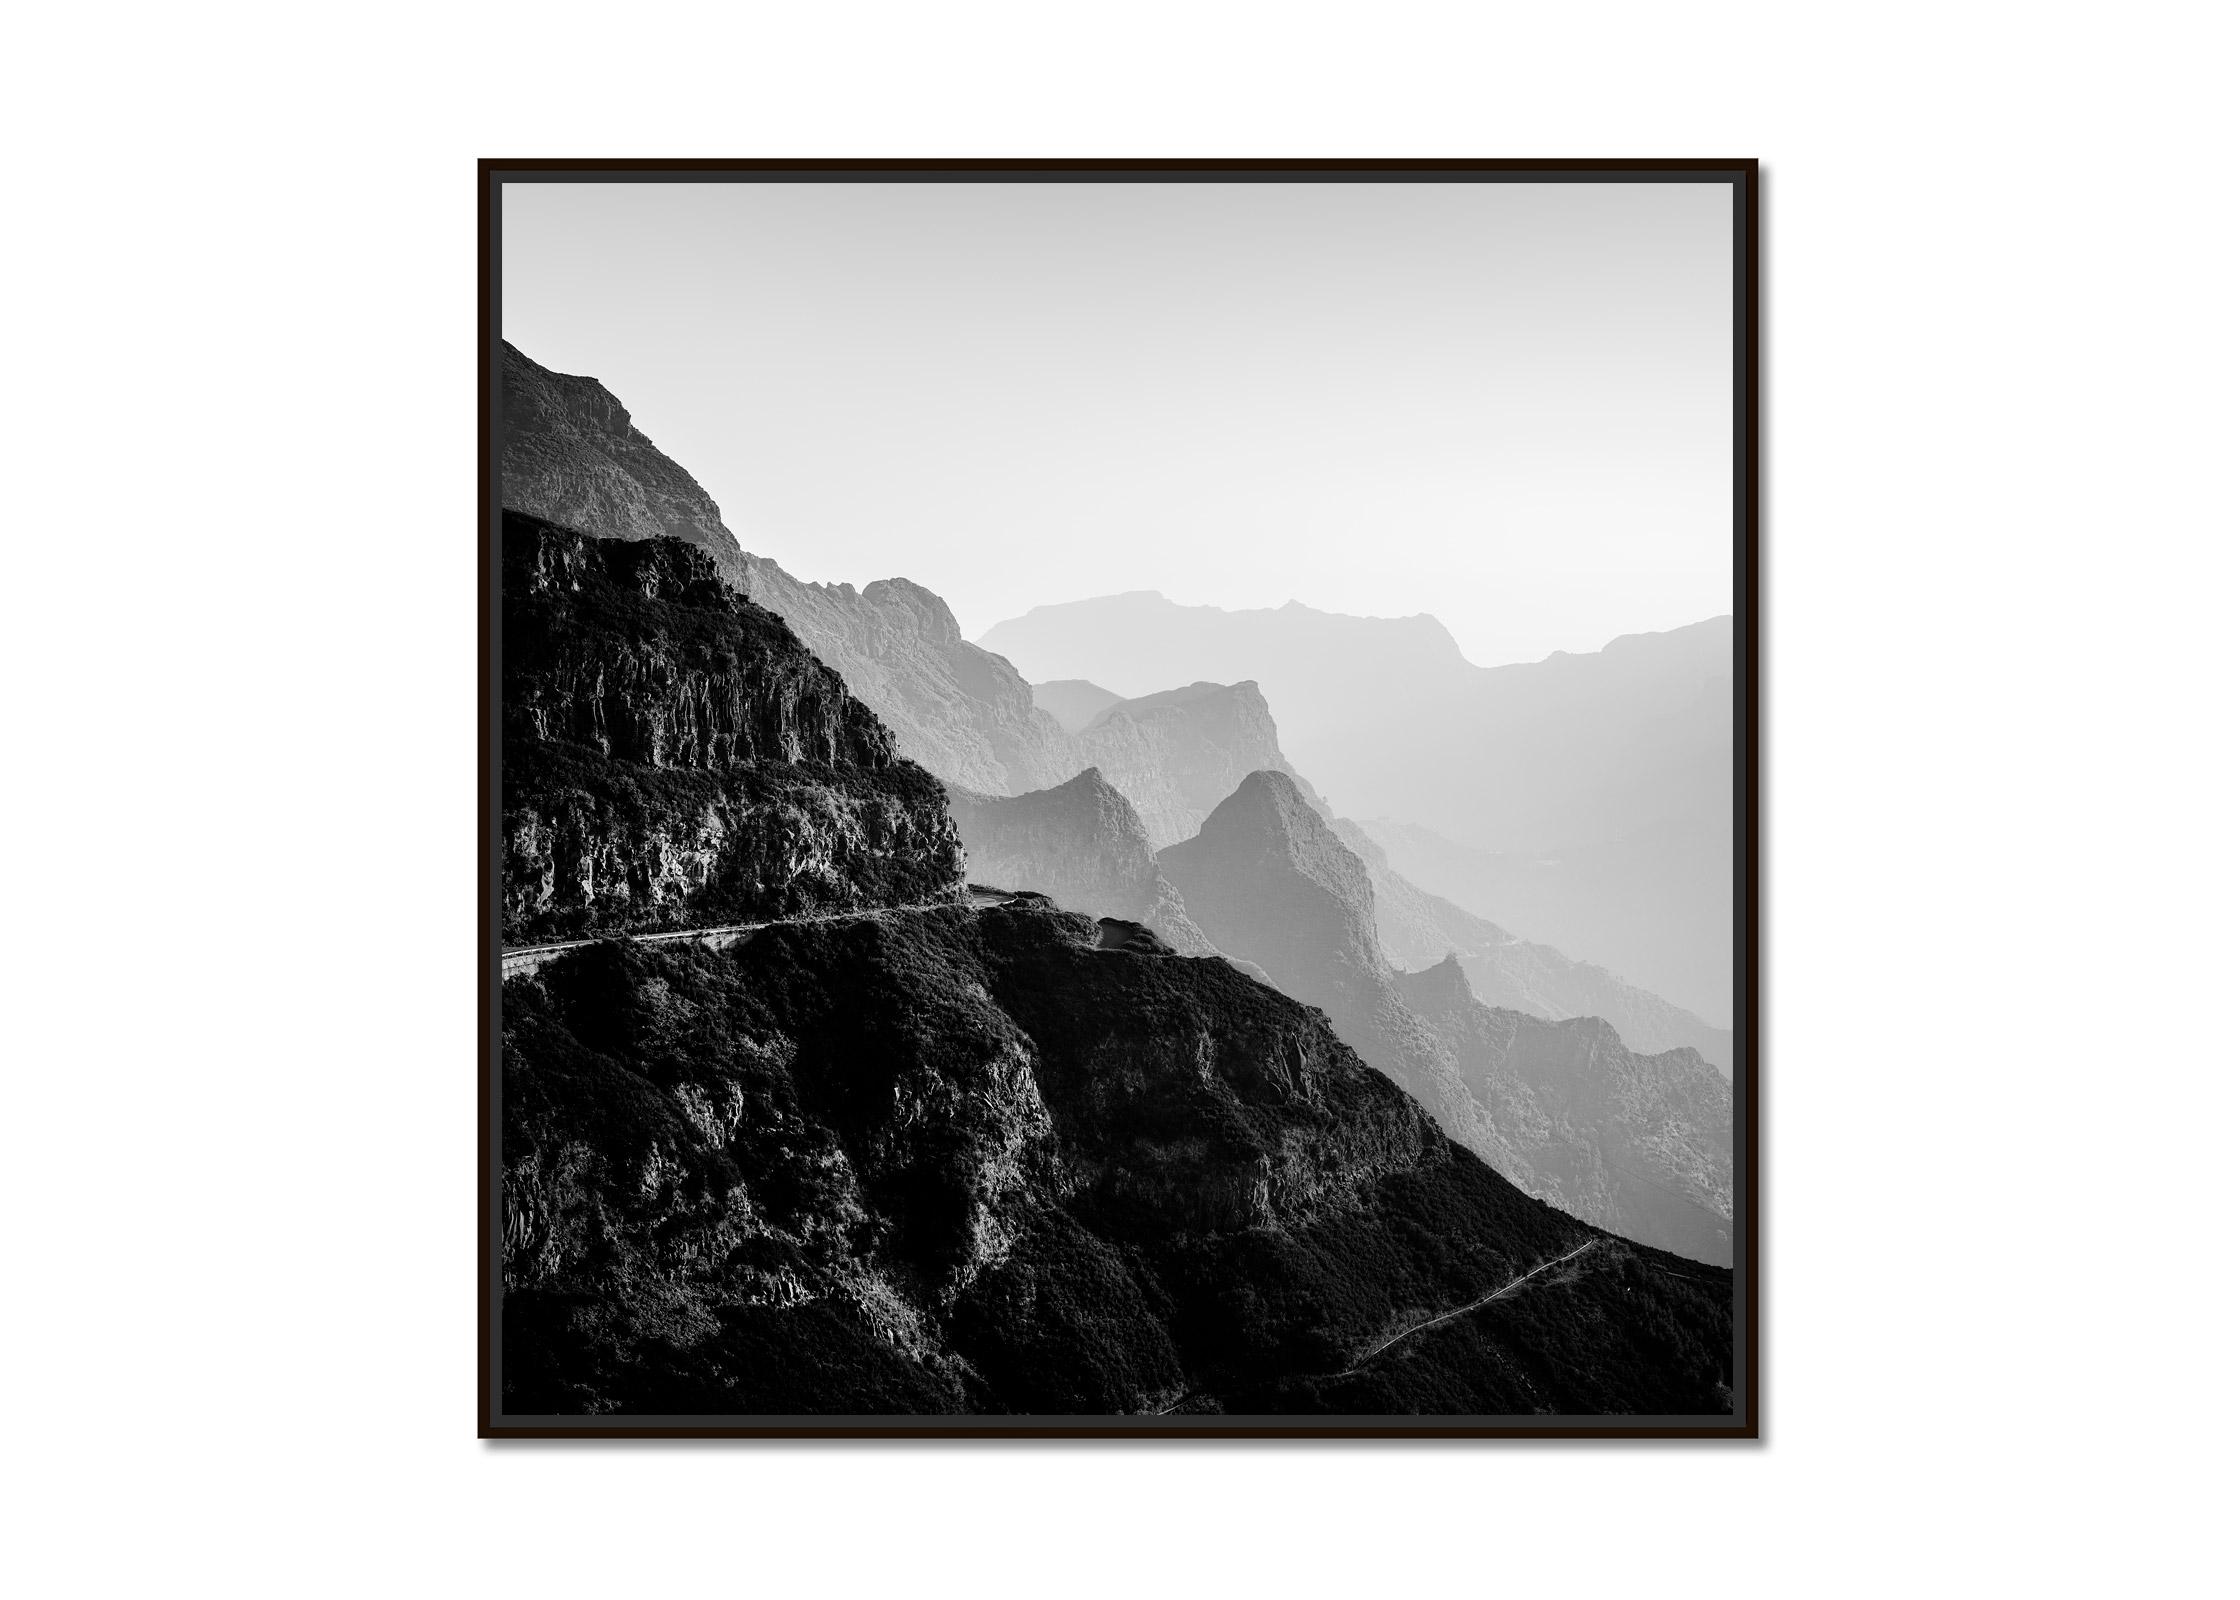 Madeira Peaks, morning Light, Fanal, Portugal, black white landscape photography - Photograph by Gerald Berghammer